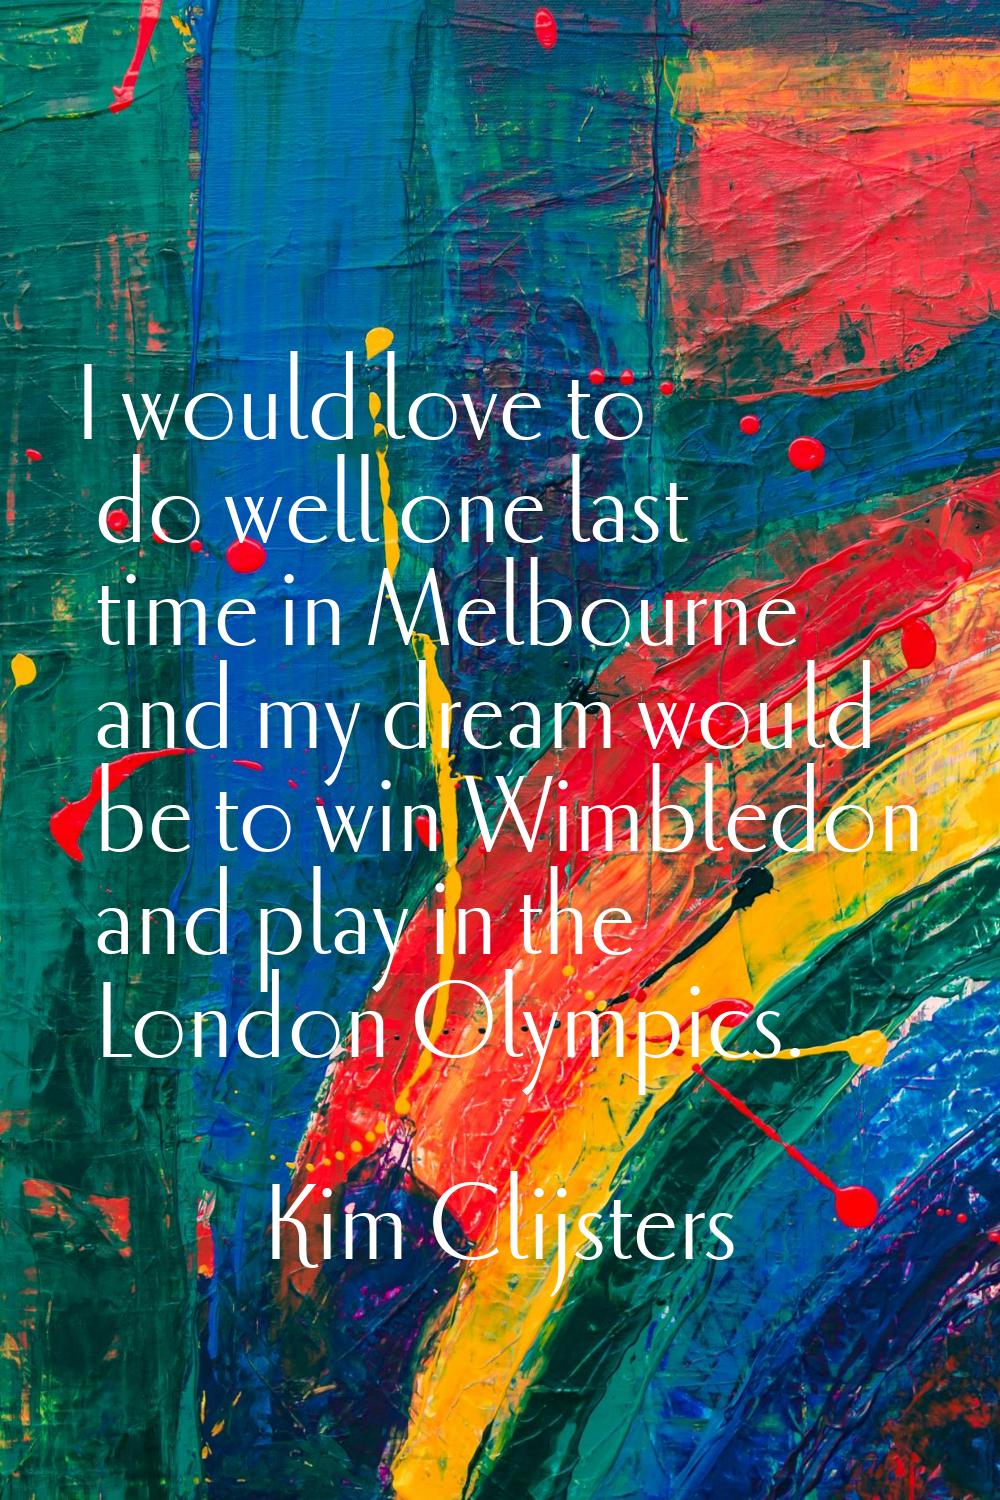 I would love to do well one last time in Melbourne and my dream would be to win Wimbledon and play 